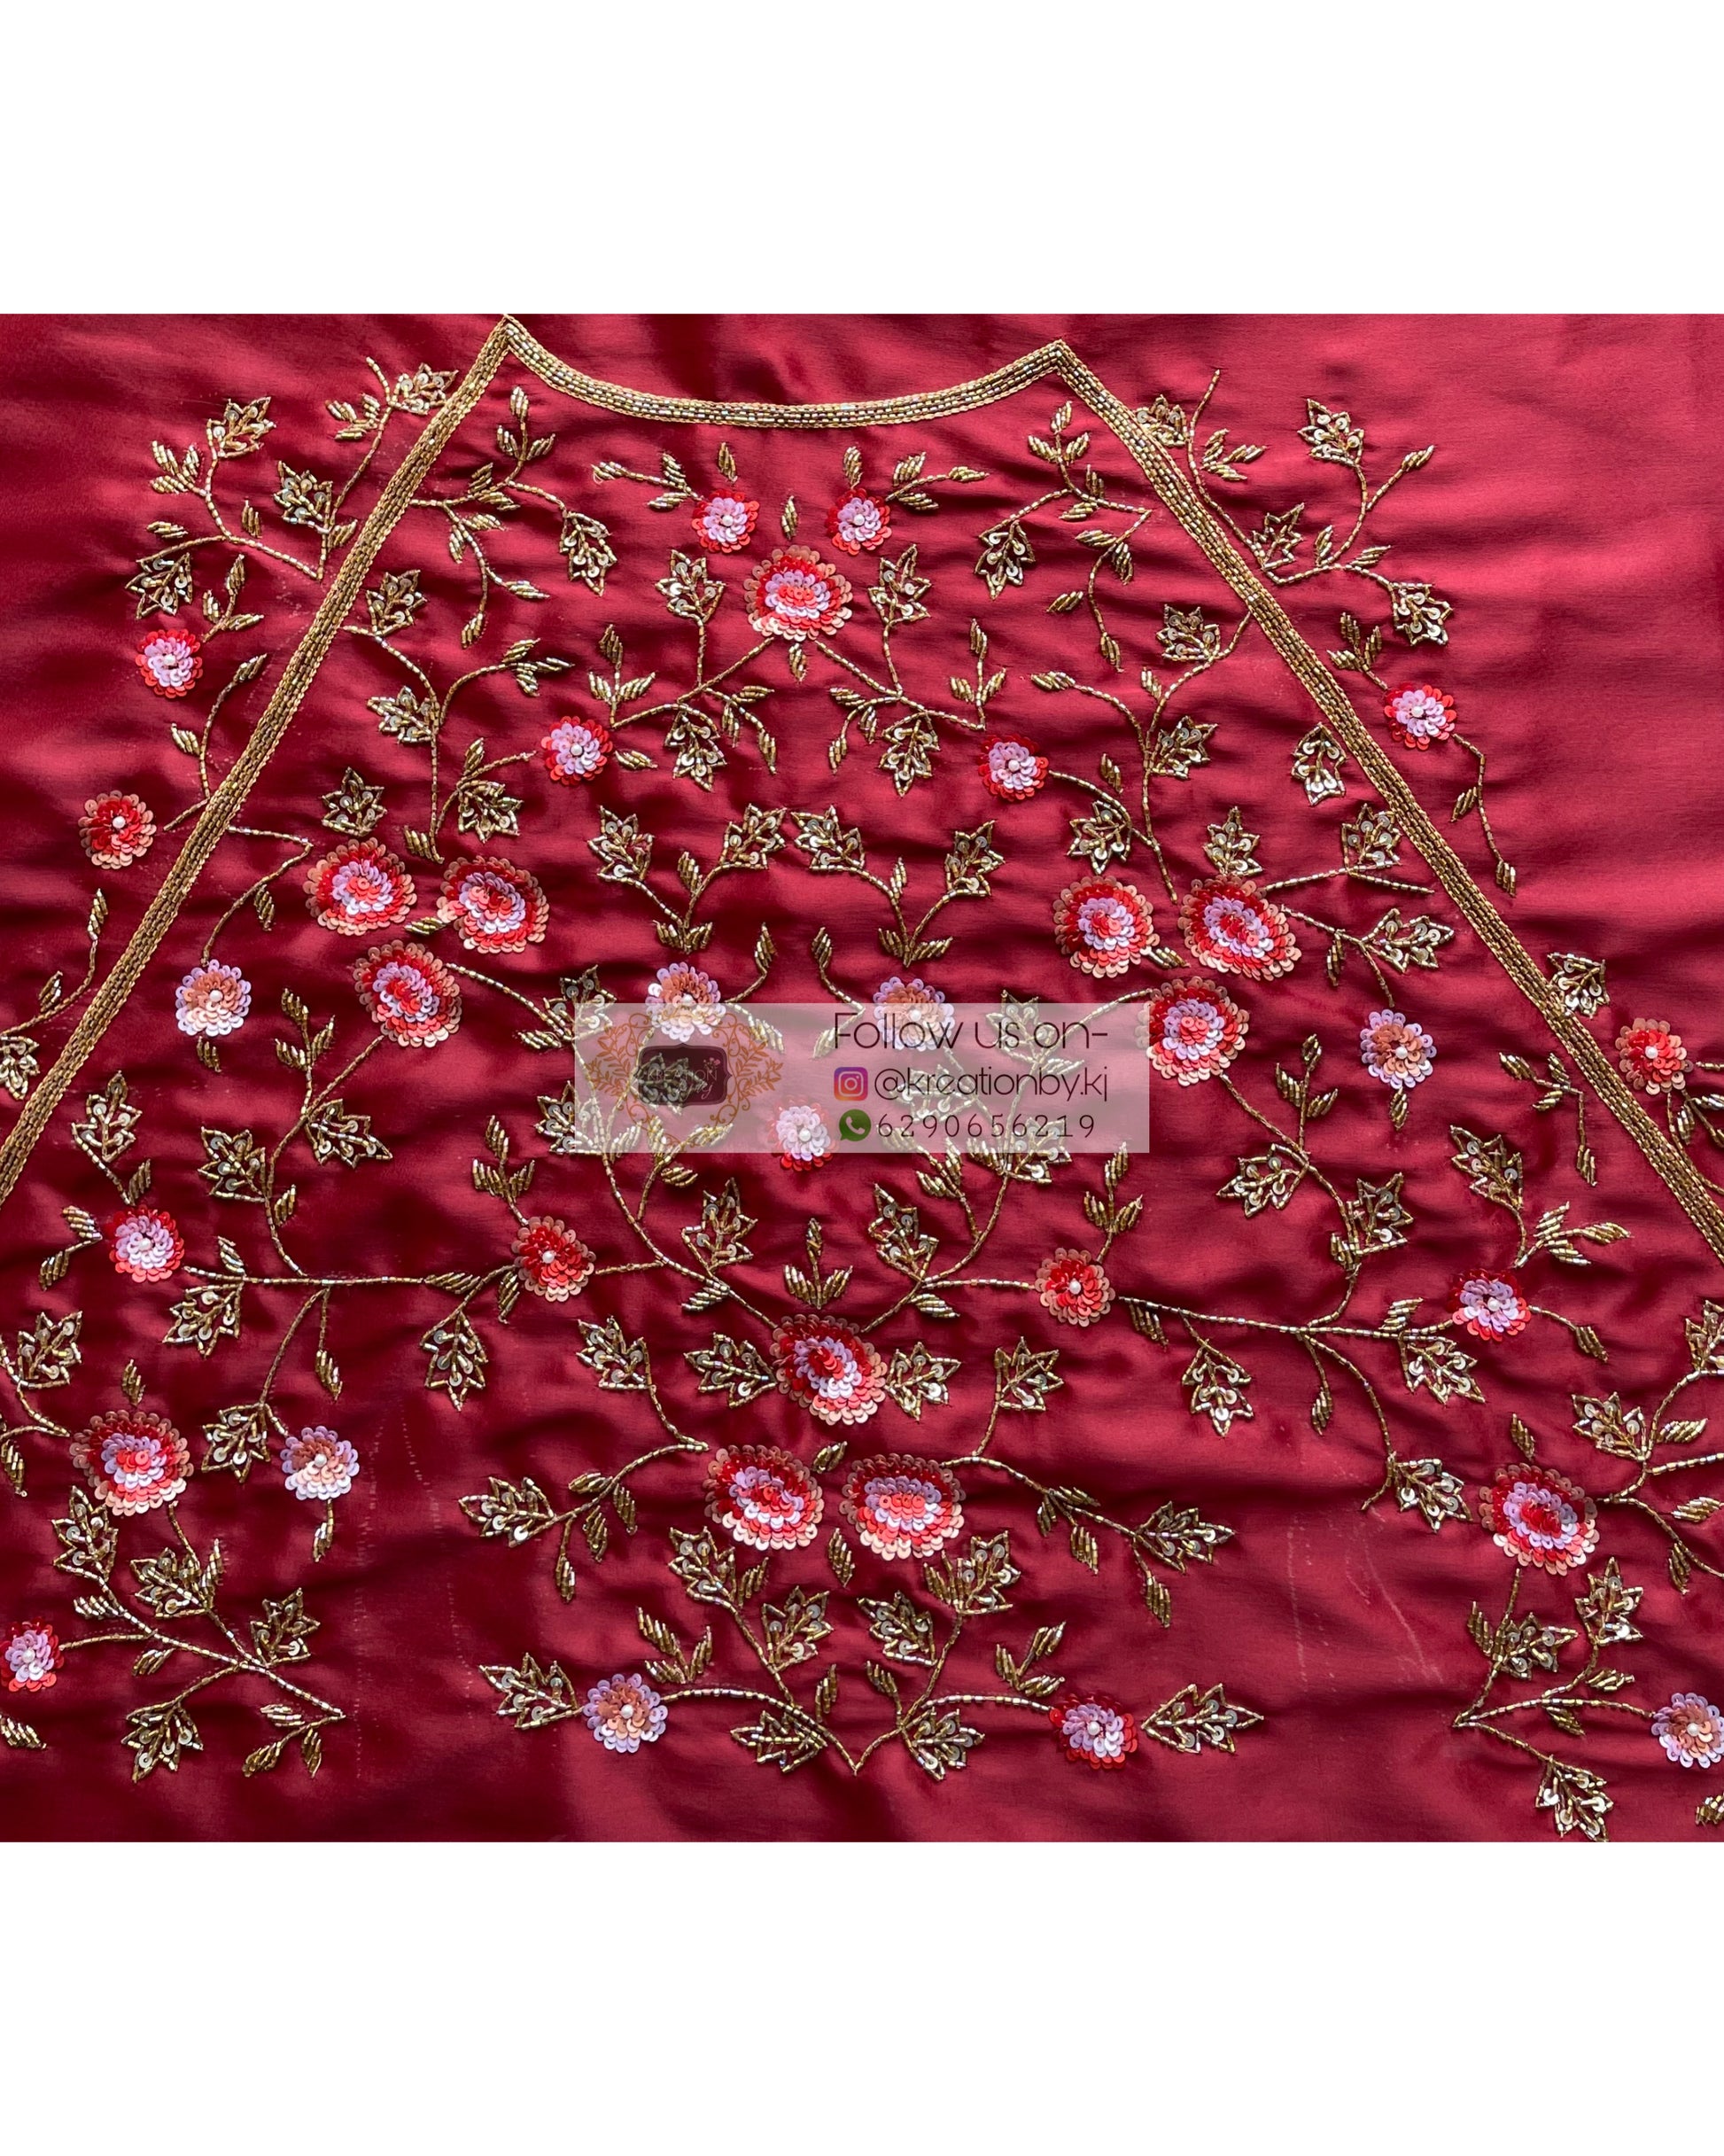 Remember the Roses Red Glass Tissue Saree - kreationbykj